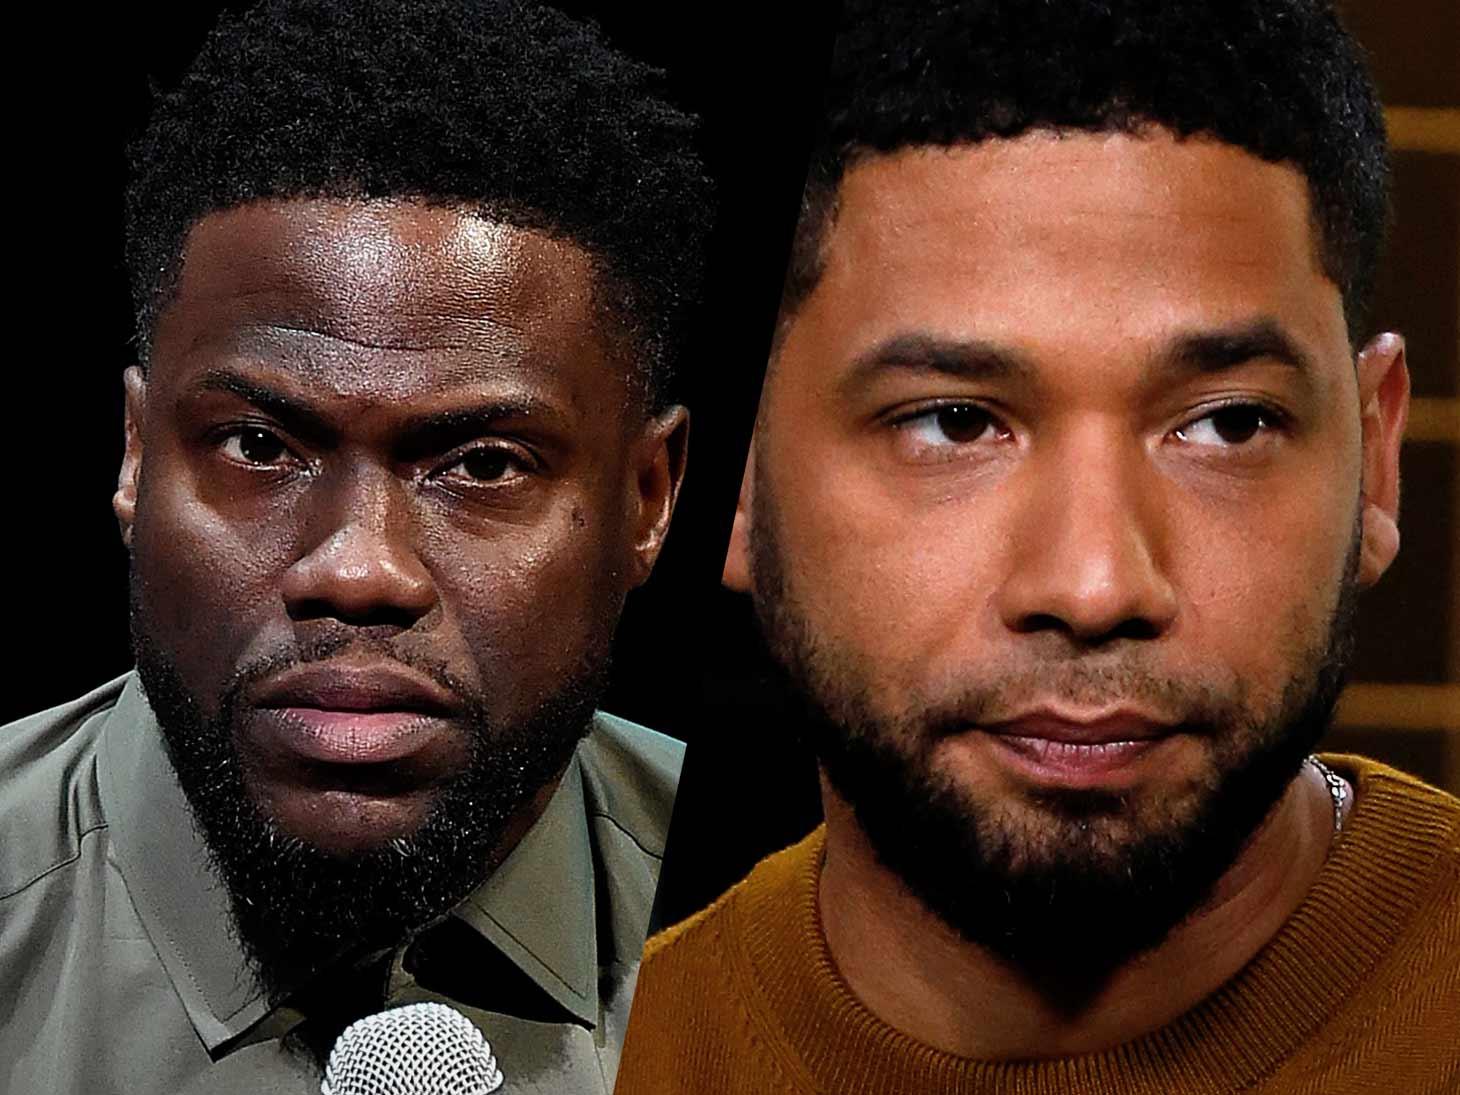 Kevin Hart Slammed By Critics For Speaking Out About Jussie Smollett Attack (UPDATE)